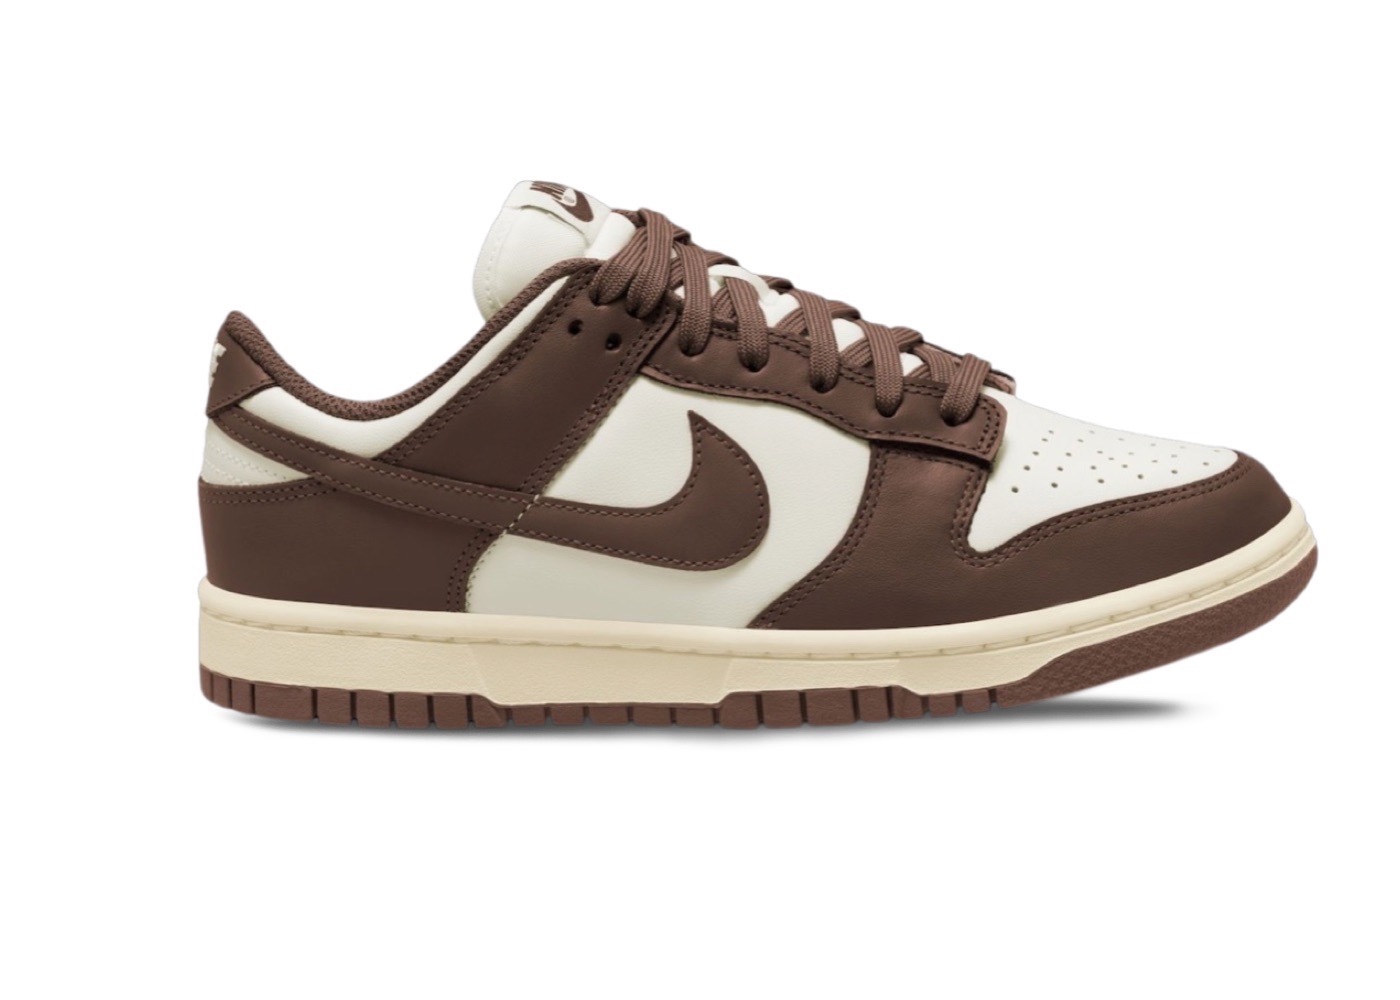 Official Images of The Nike Dunk Low “Sail Cacao Wow” Wmns